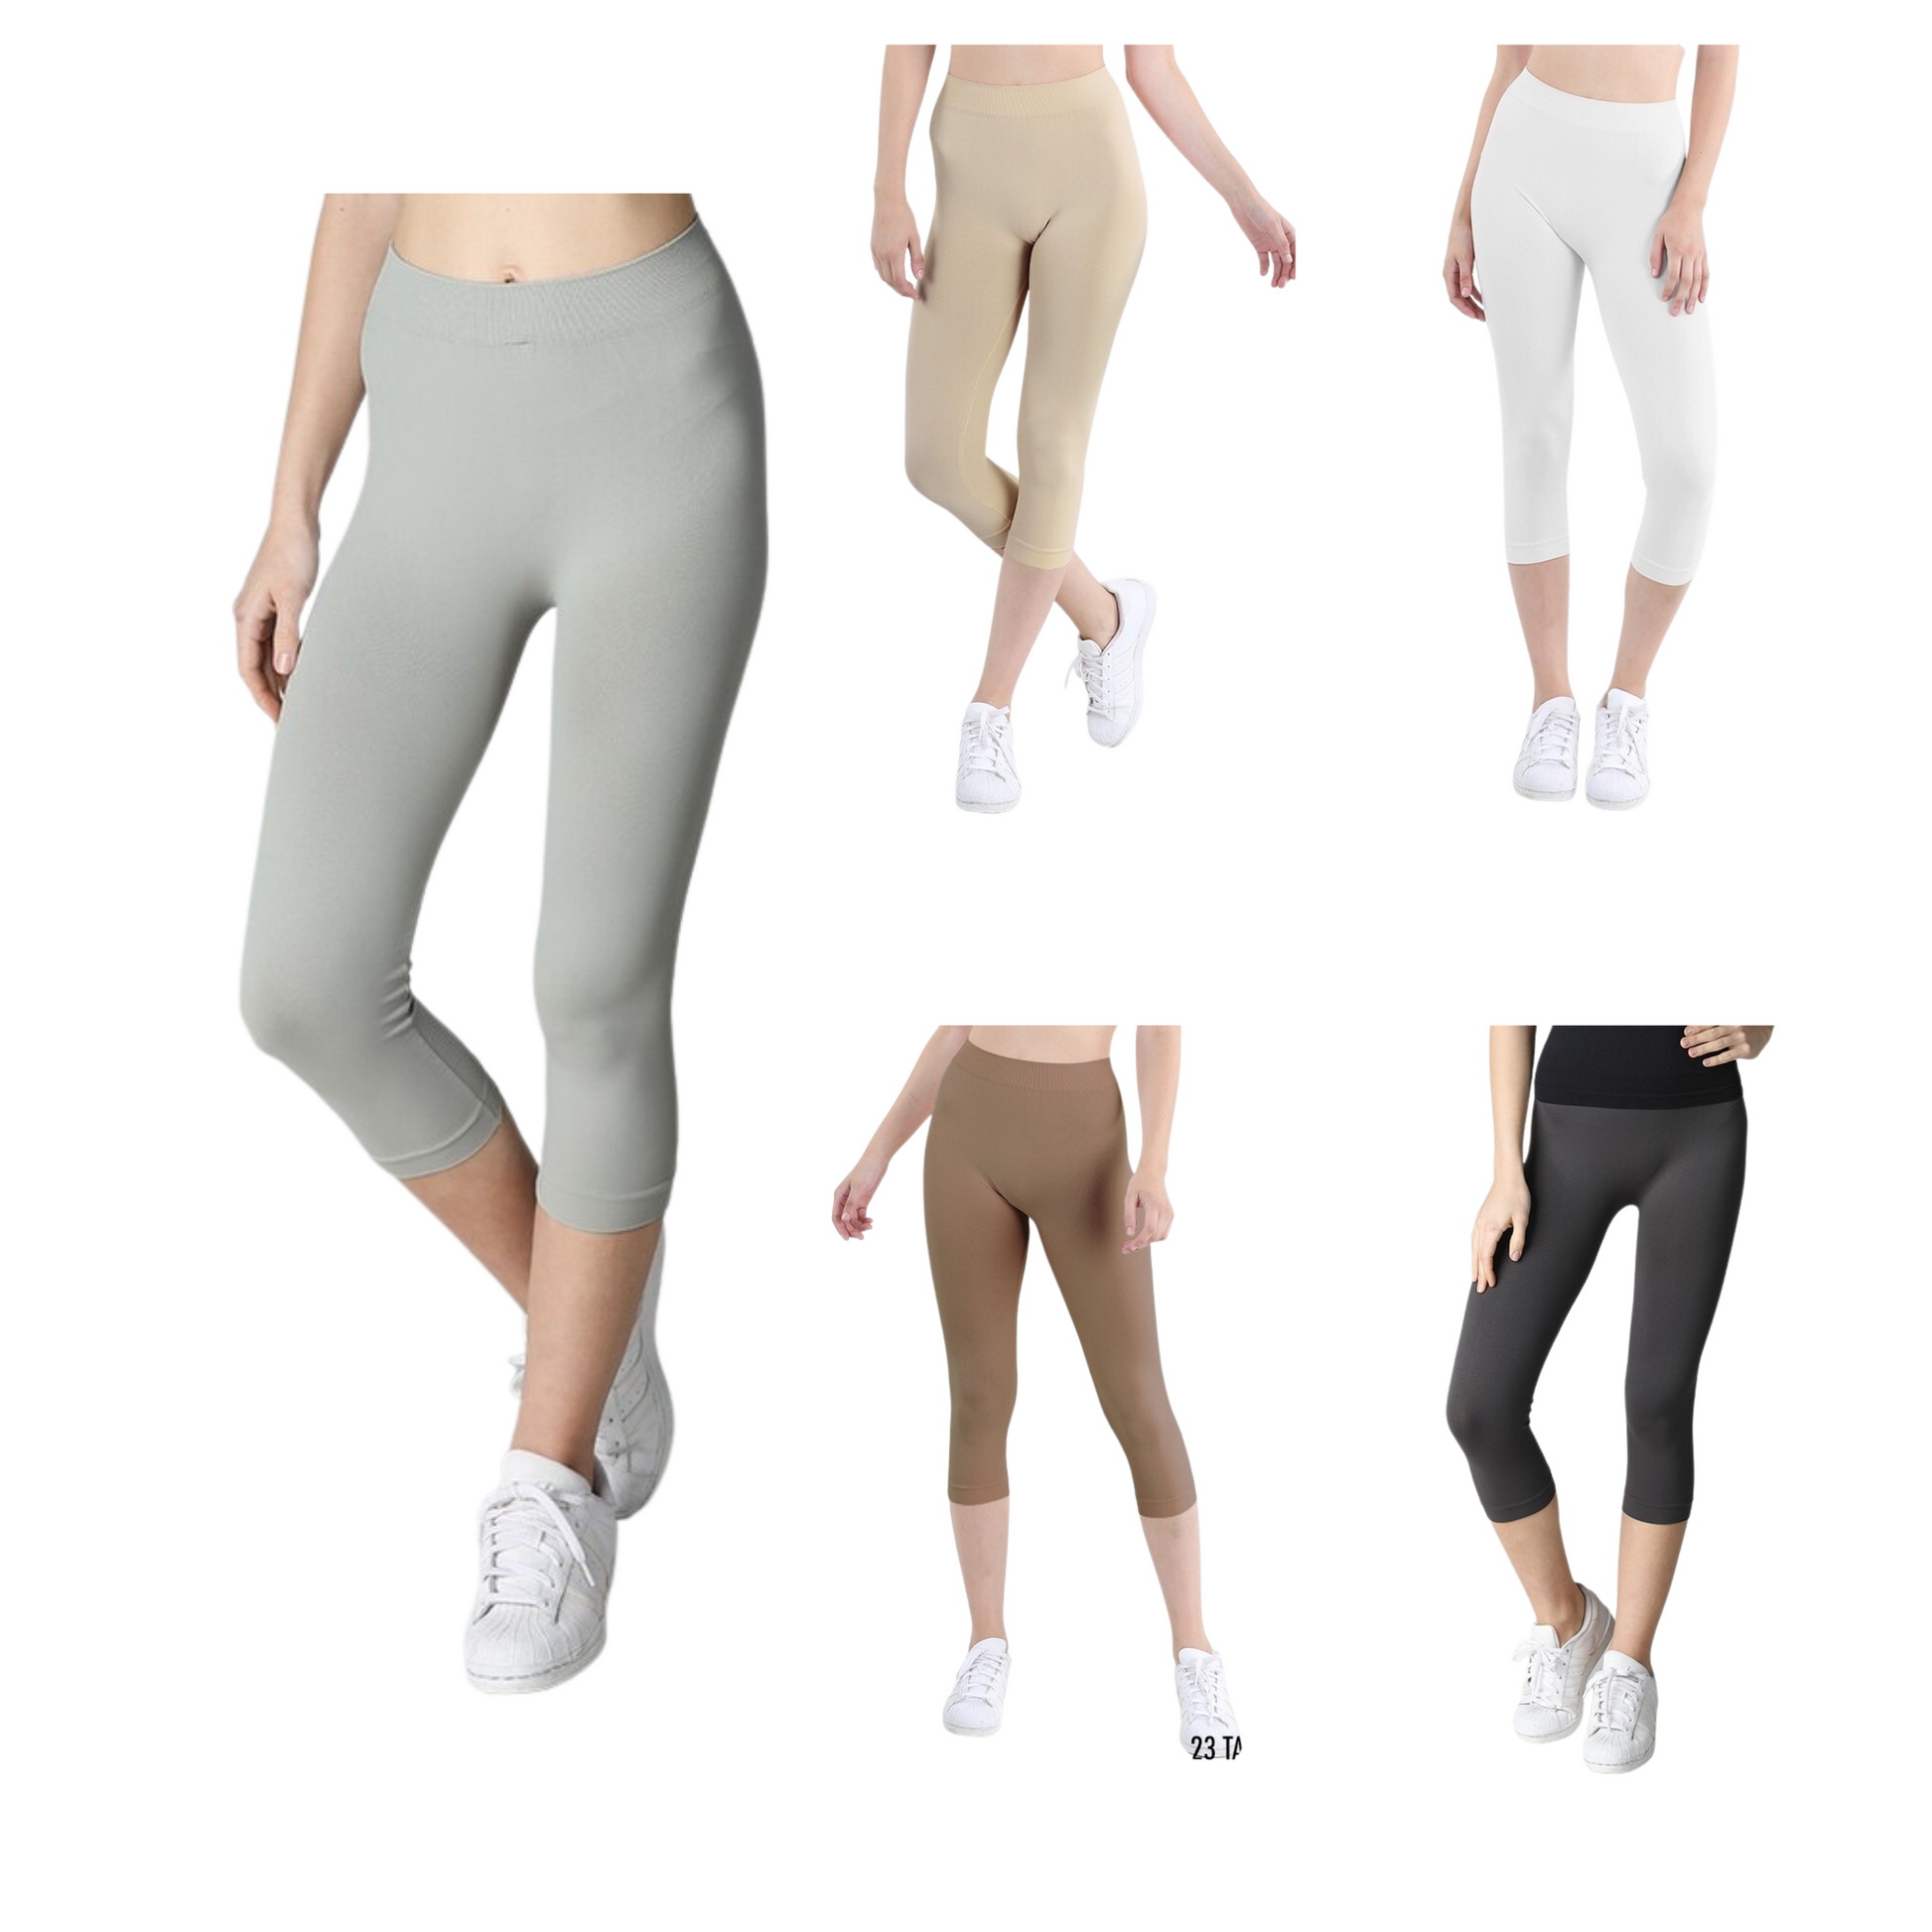 Our Capri Leggings are made from butter-soft fabric that fits all sizes. They come in a wide variety of colors to match your style. Enjoy comfortable and fashionable bottoms with no fuss.